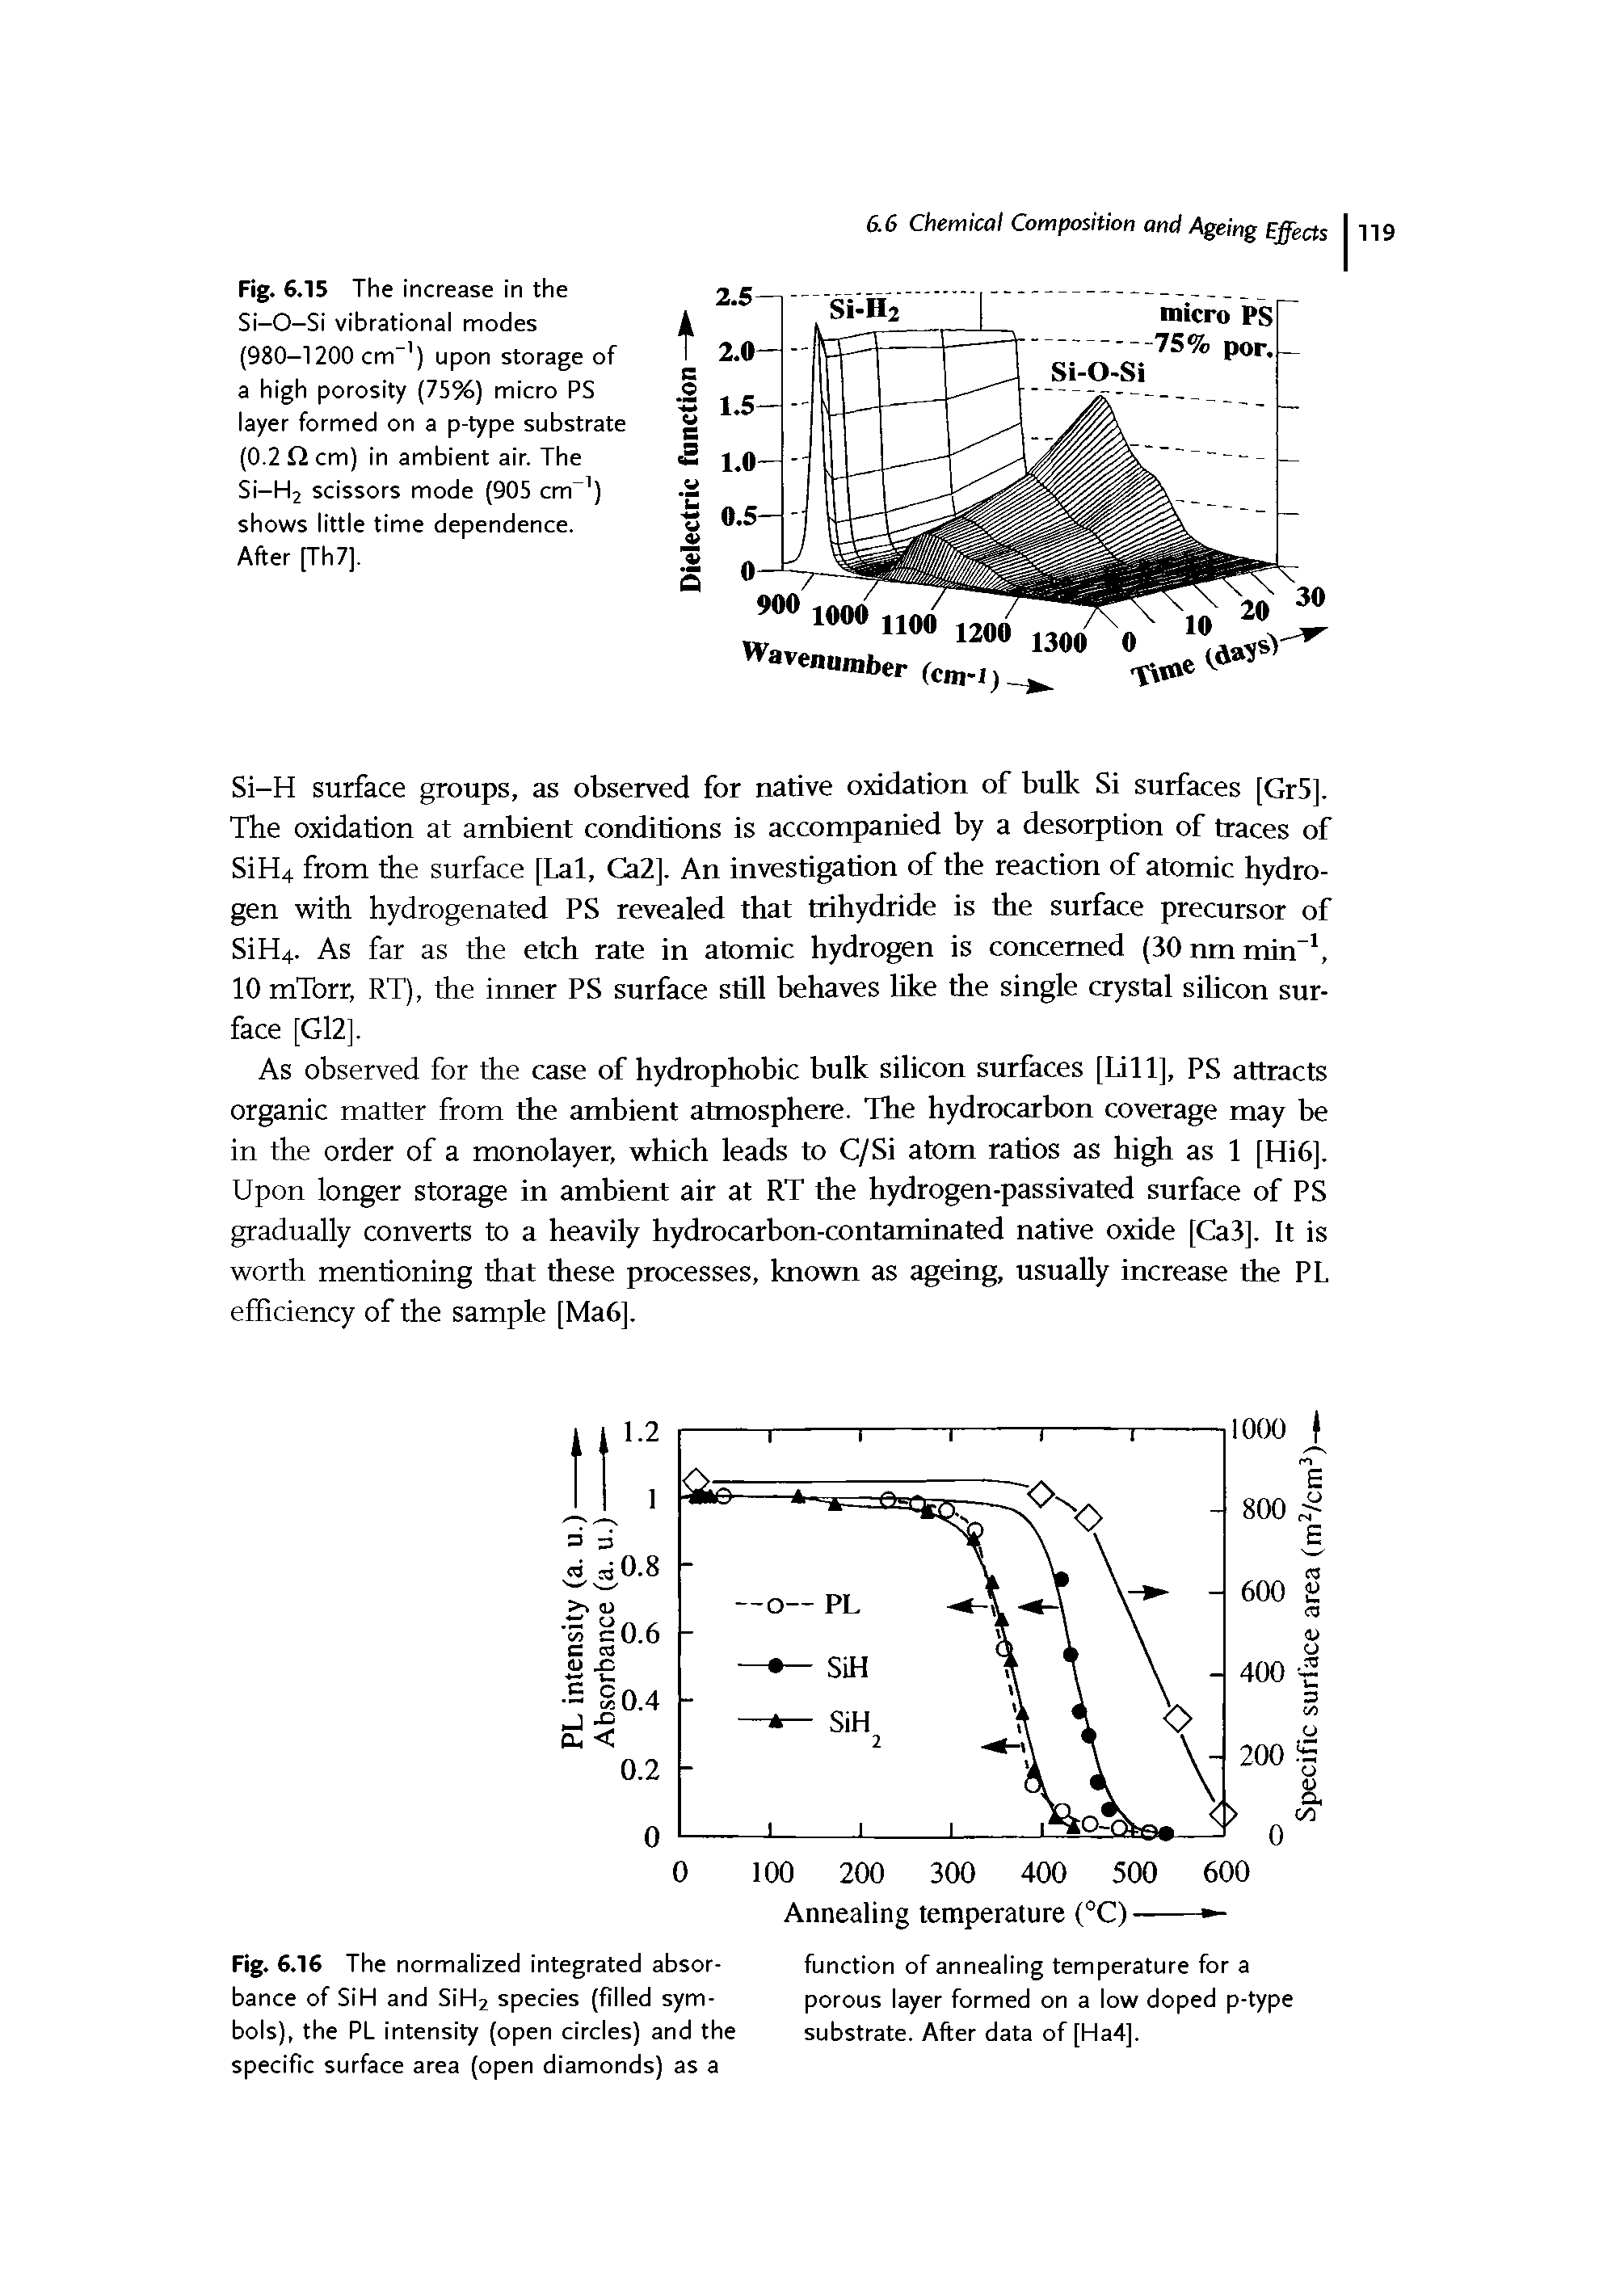 Fig. 6.15 The increase in the Si-O-Si vibrational modes (980-1200 cm"1) upon storage of a high porosity (75%) micro PS layer formed on a p-type substrate (0.2 Q cm) in ambient air. The Si—H2 scissors mode (905 cm"1) shows little time dependence. After [Th7],...